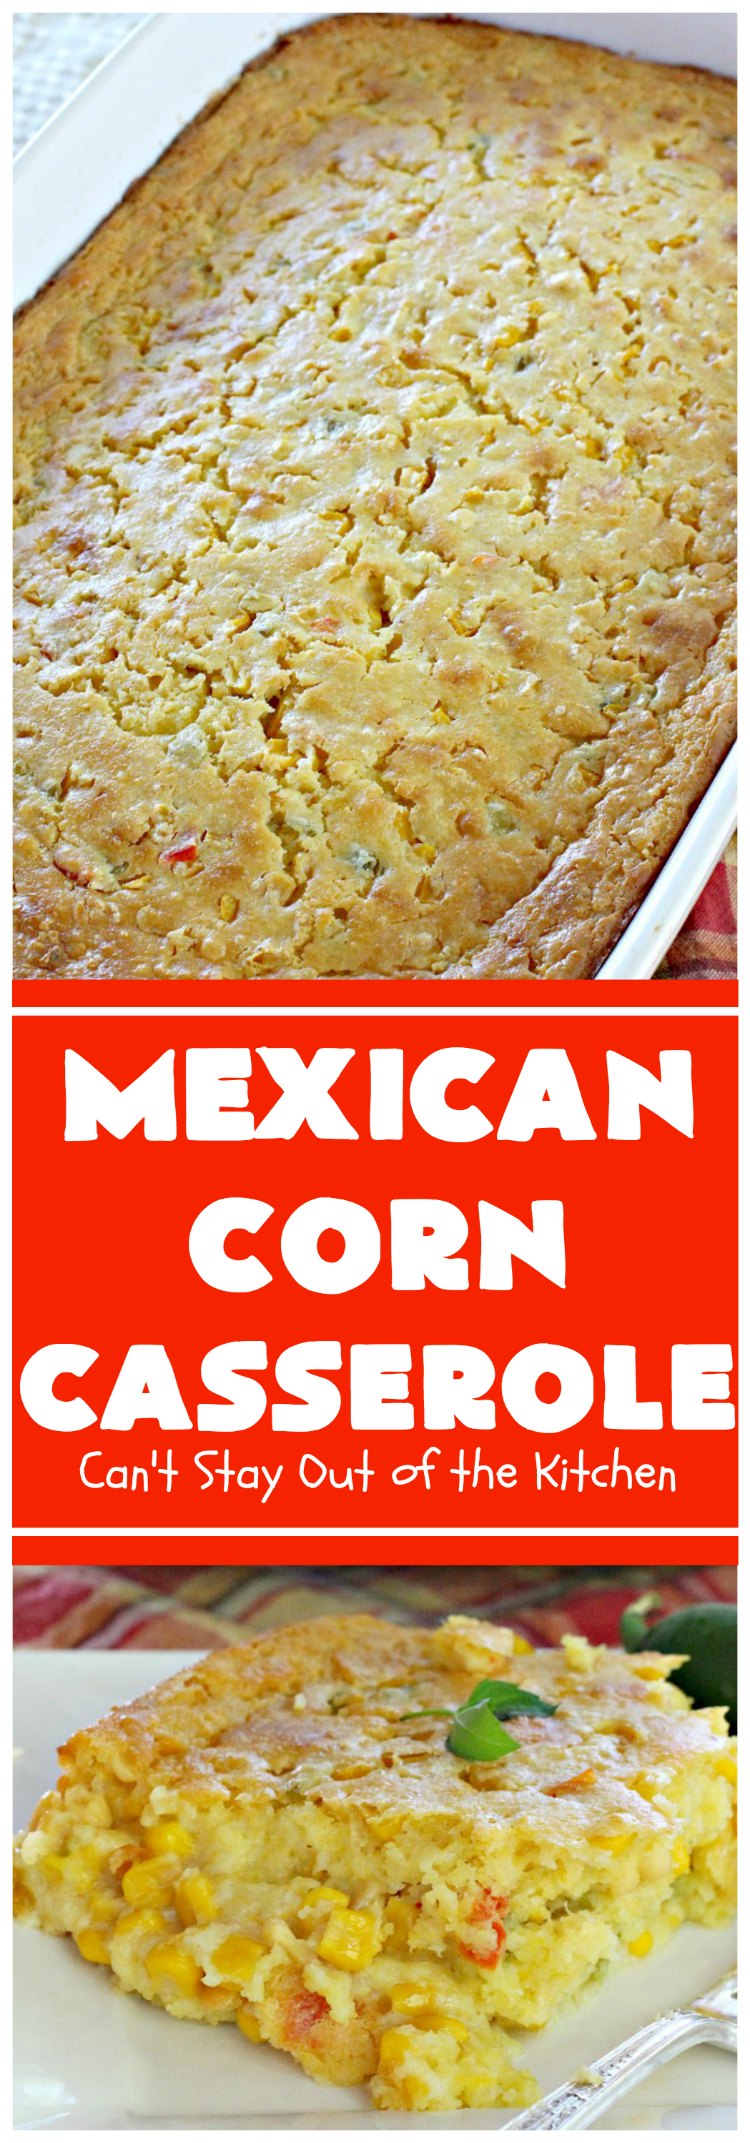 Mexican Corn Casserole | Can't Stay Out of the Kitchen